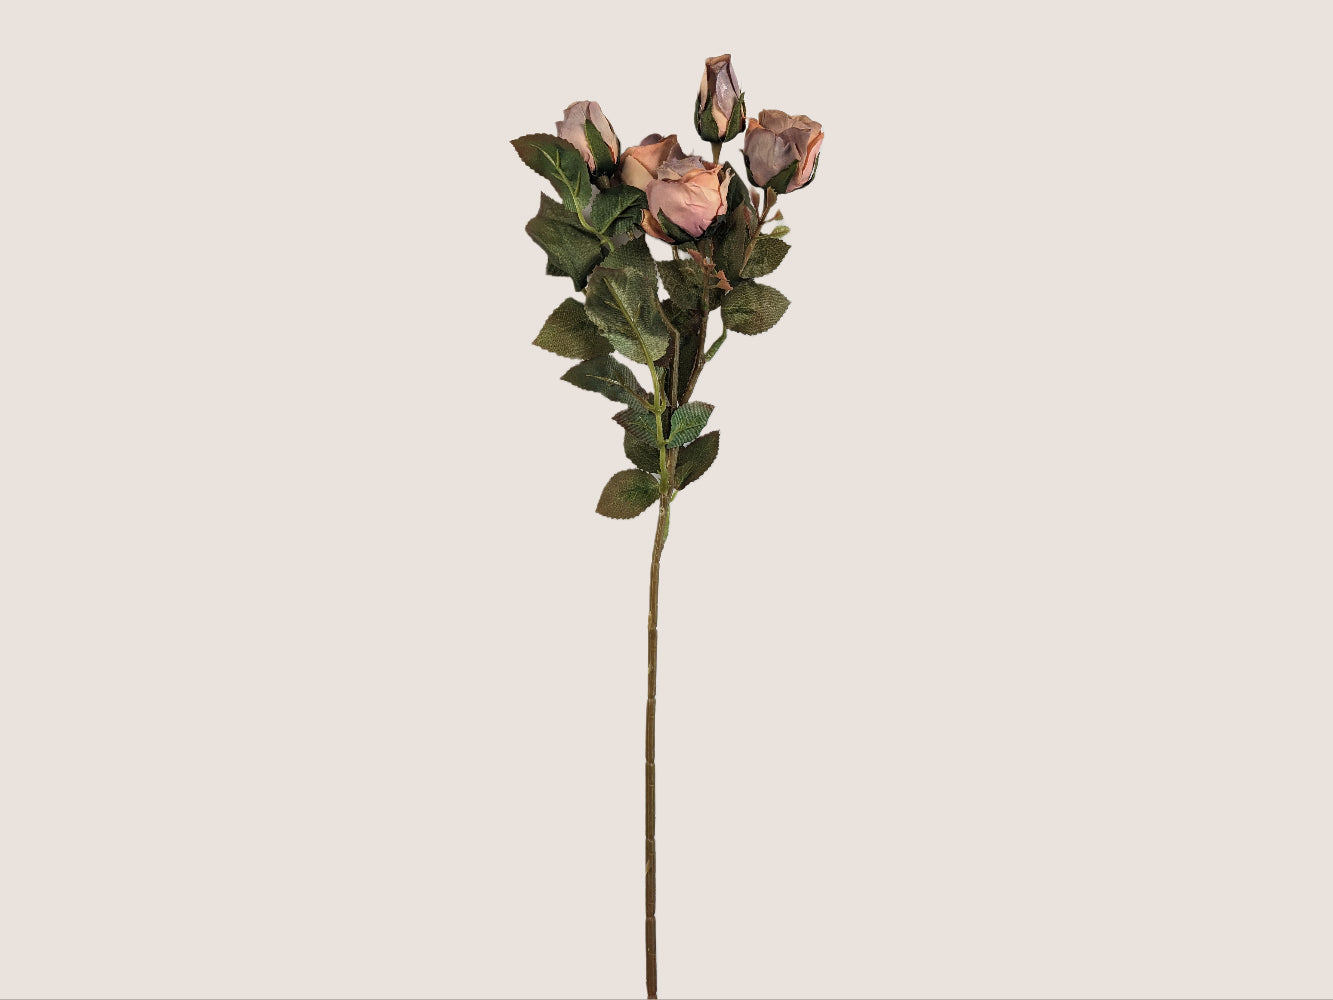 This image shows an artificial preserved-look single rose with a mauve pink, purple, and light brown color scheme. The rose has five flower heads on a 17-inch tall stem that has a green to brown gradient. The stem also has serrated leaves with dark red tips and small artificial buds for a lifelike appearance. The image has a neutral beige background that contrasts with the rose's colors.